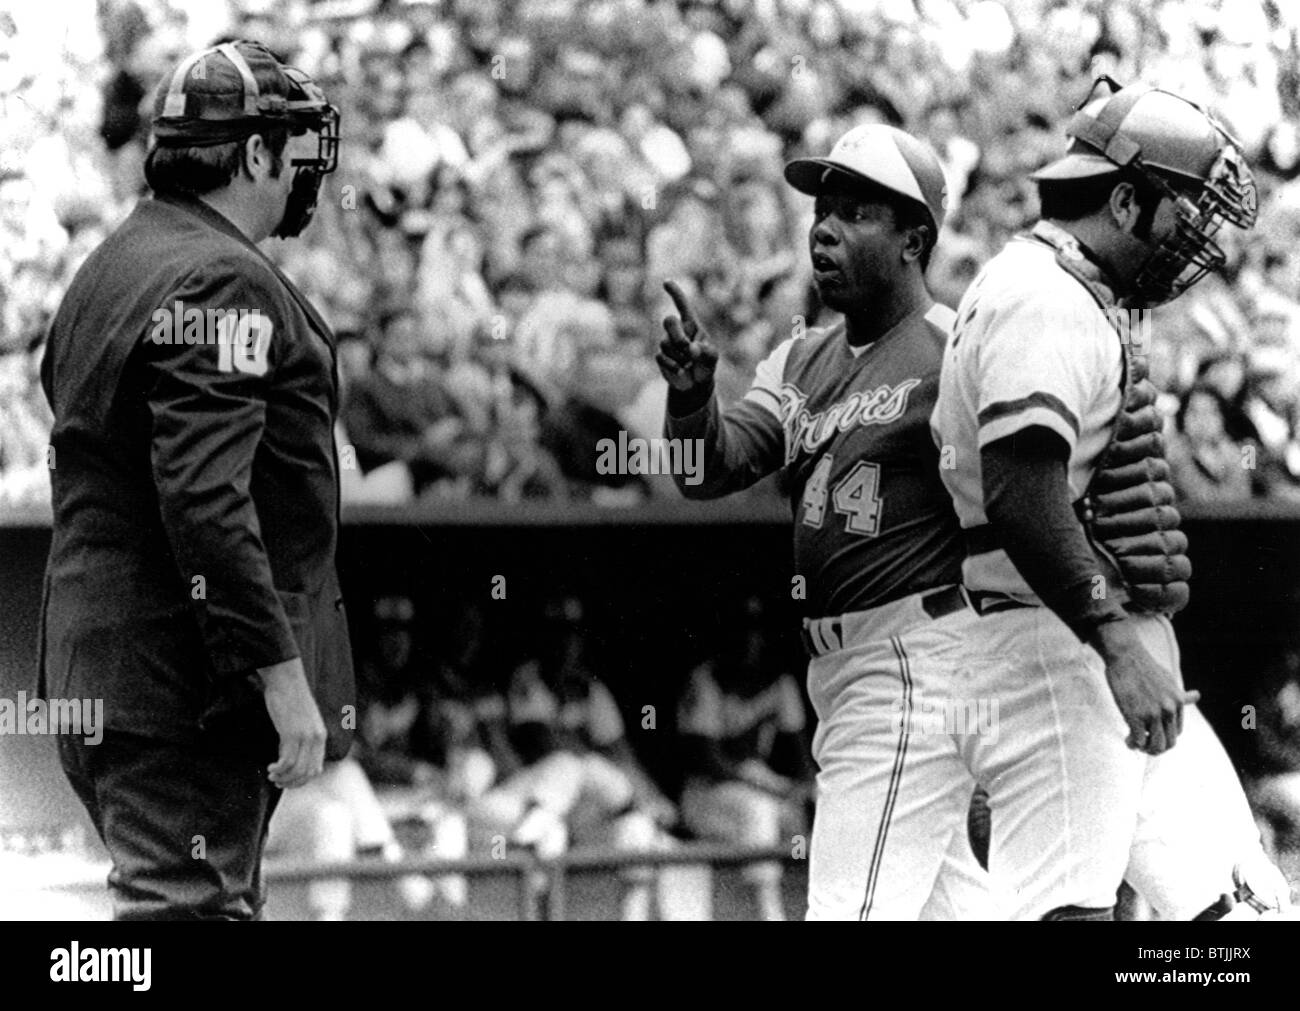 Umpire John McSherry listens to Hank Aaron argue a called third strike as catcher Johnny Bench looks down, 1974 Stock Photo